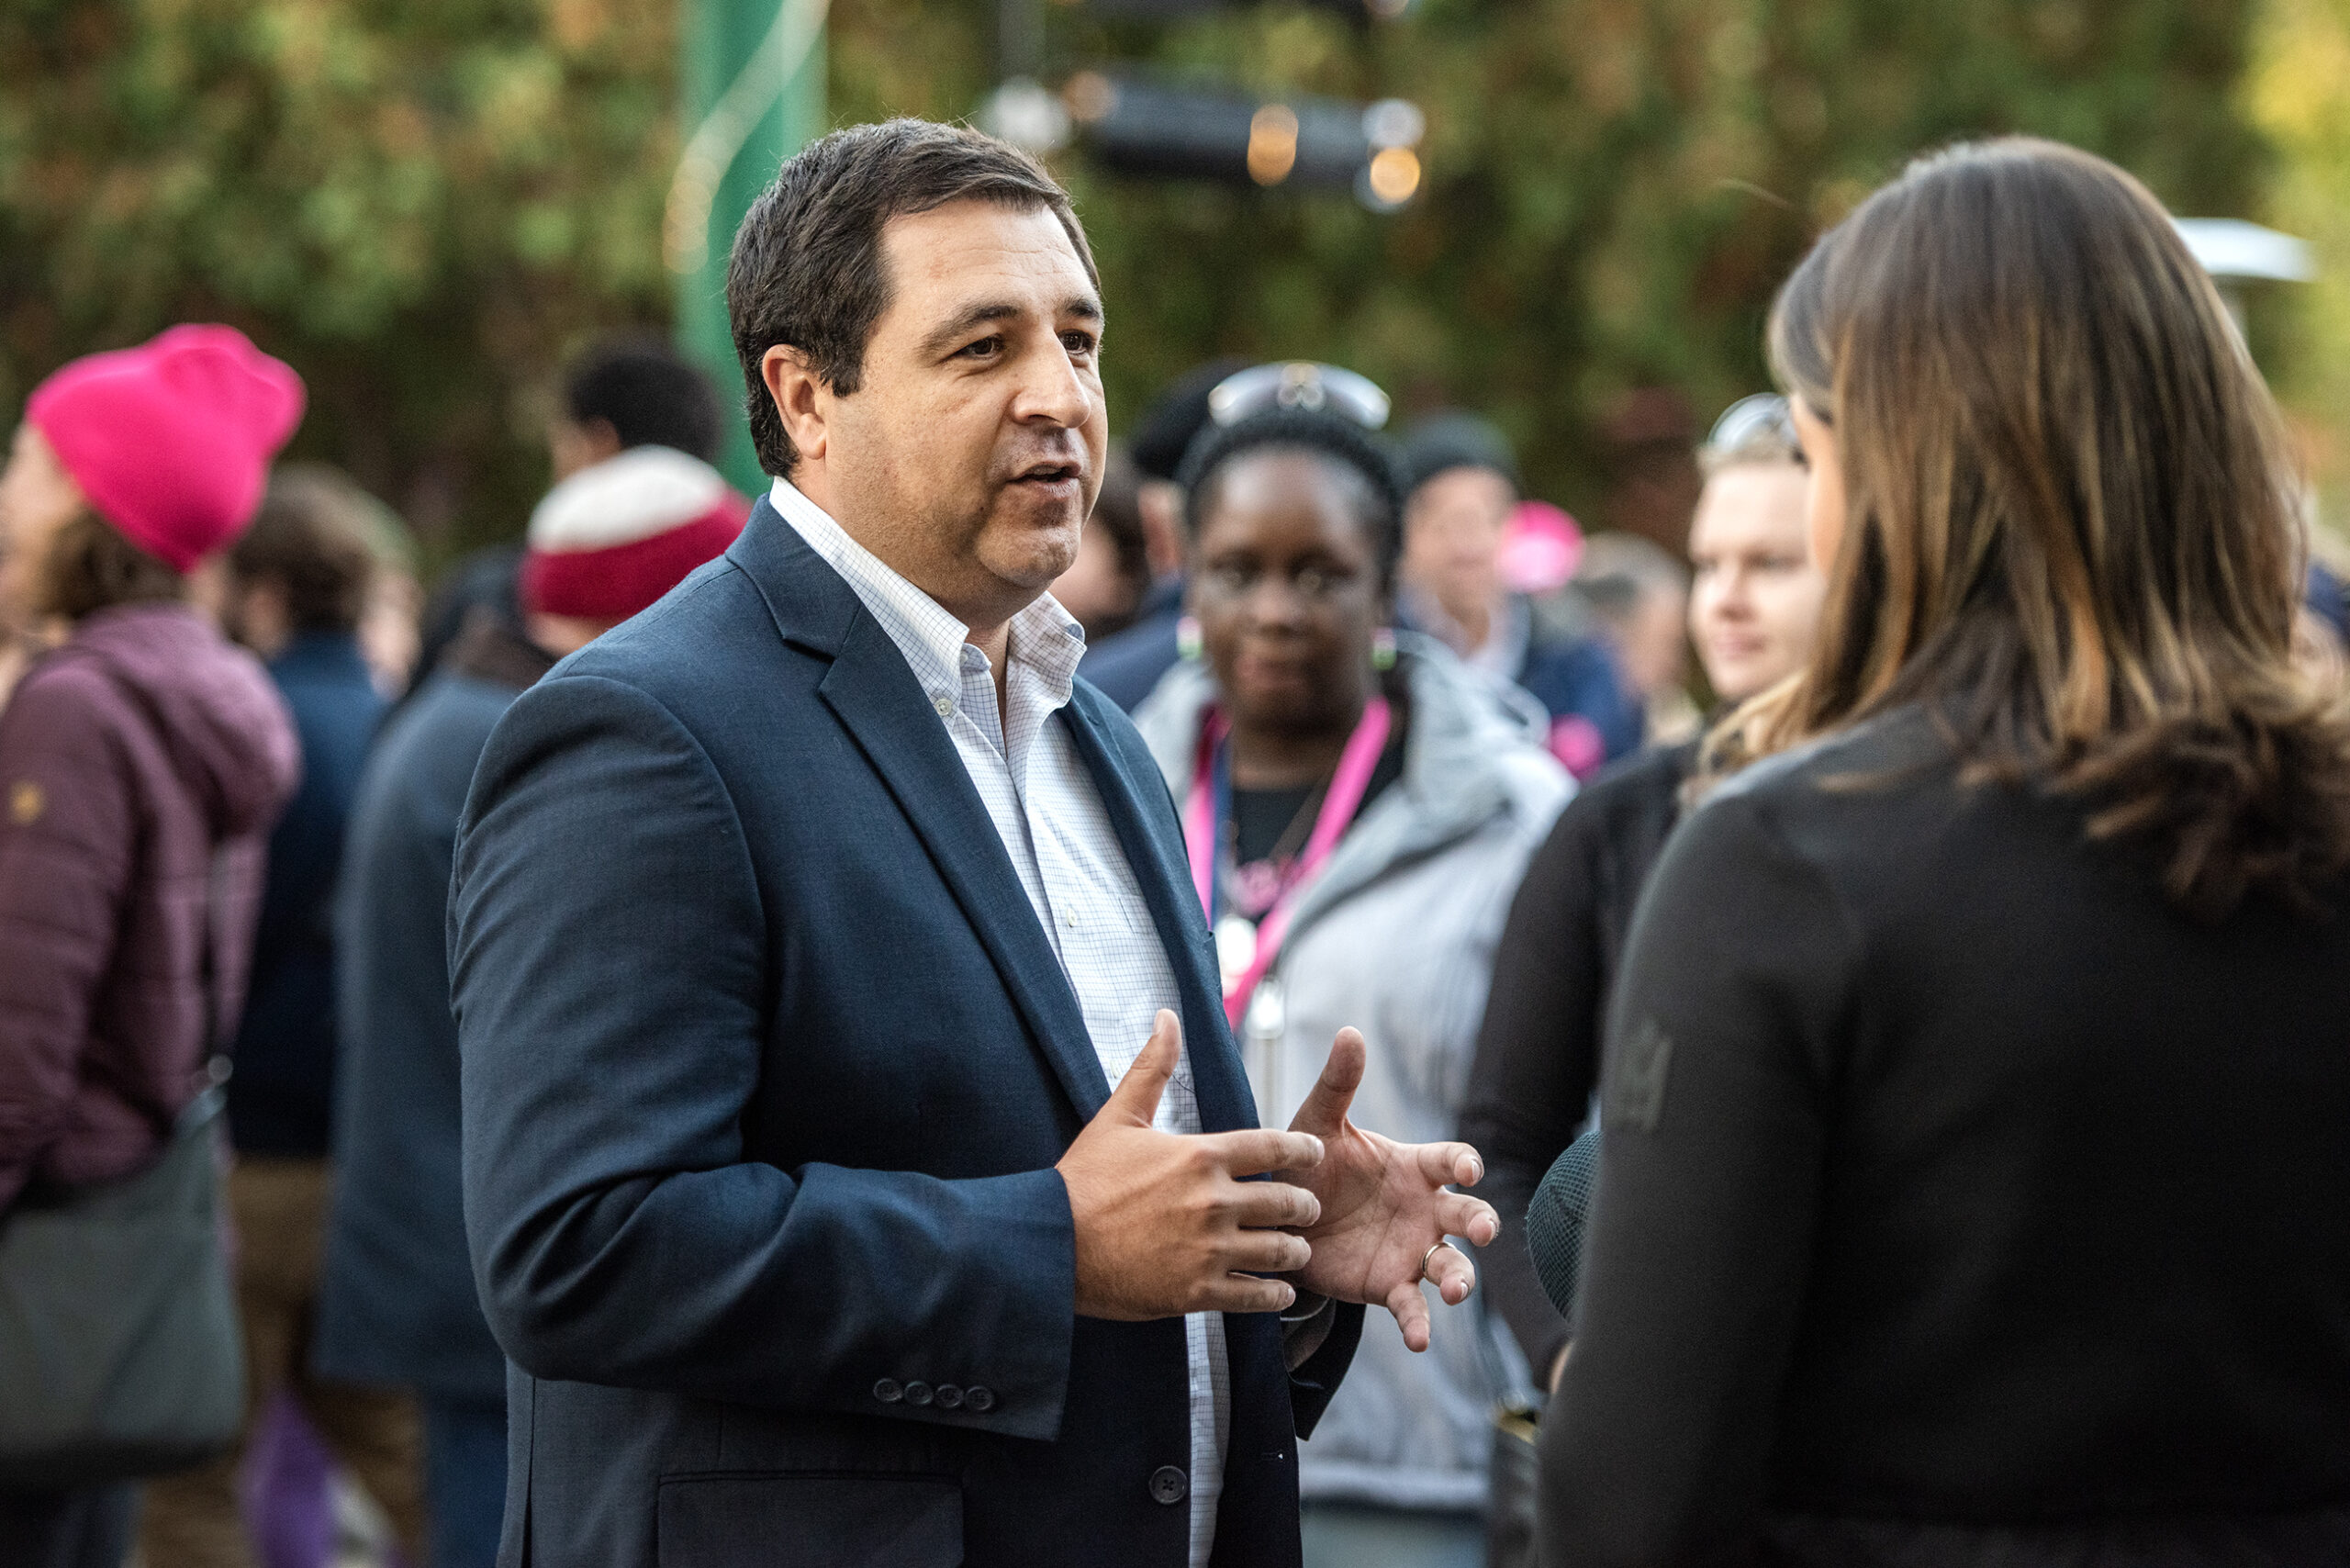 Democratic Attorney General Josh Kaul says he’s running to protect ‘freedom’ that’s under attack in Wisconsin